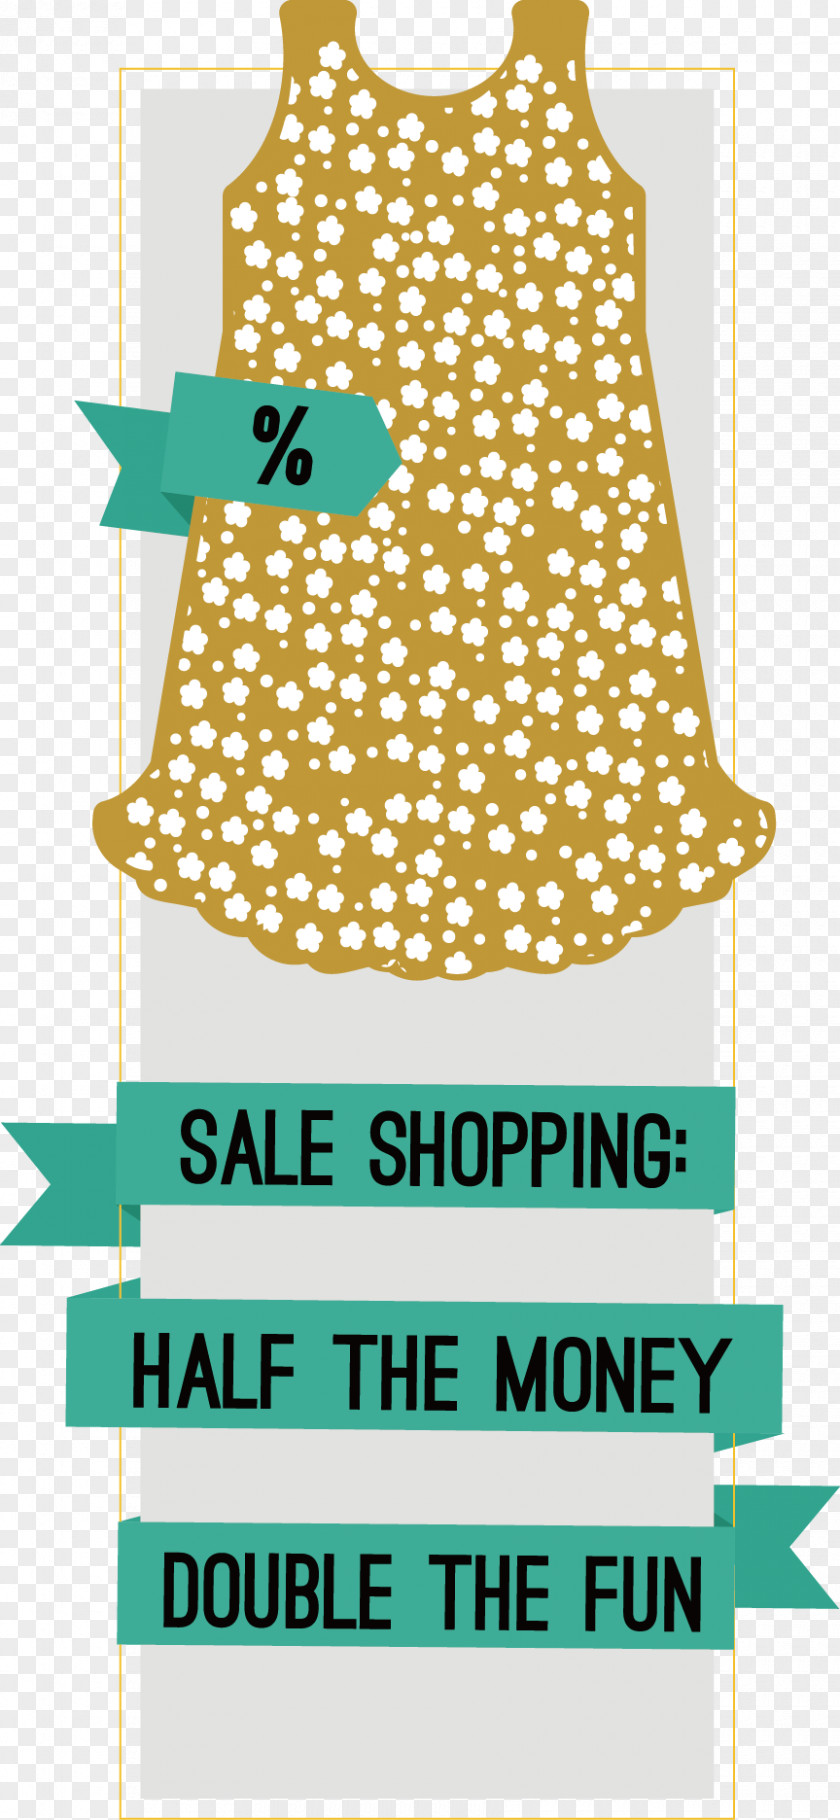 Women's Promotional Posters Fashion Dress Sales PNG